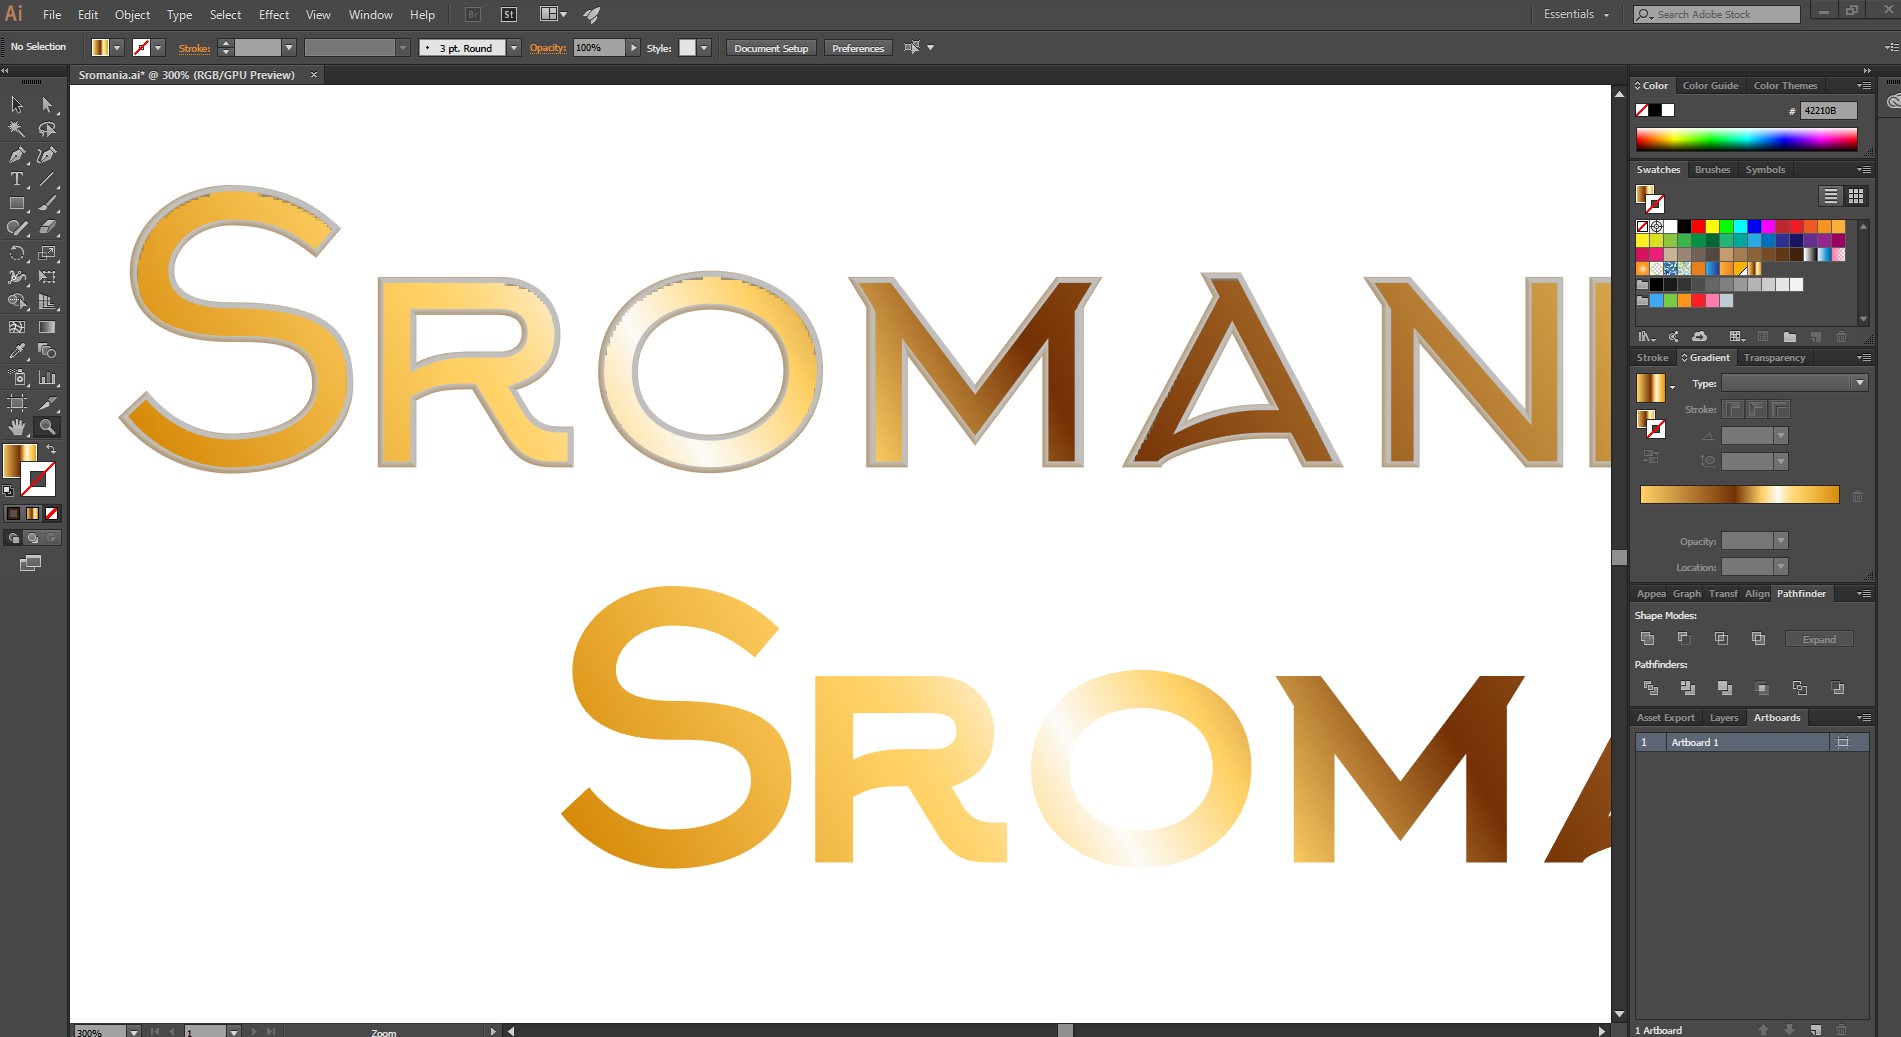 How can I get the Bevel & Emboss effect for text in Illustrator?